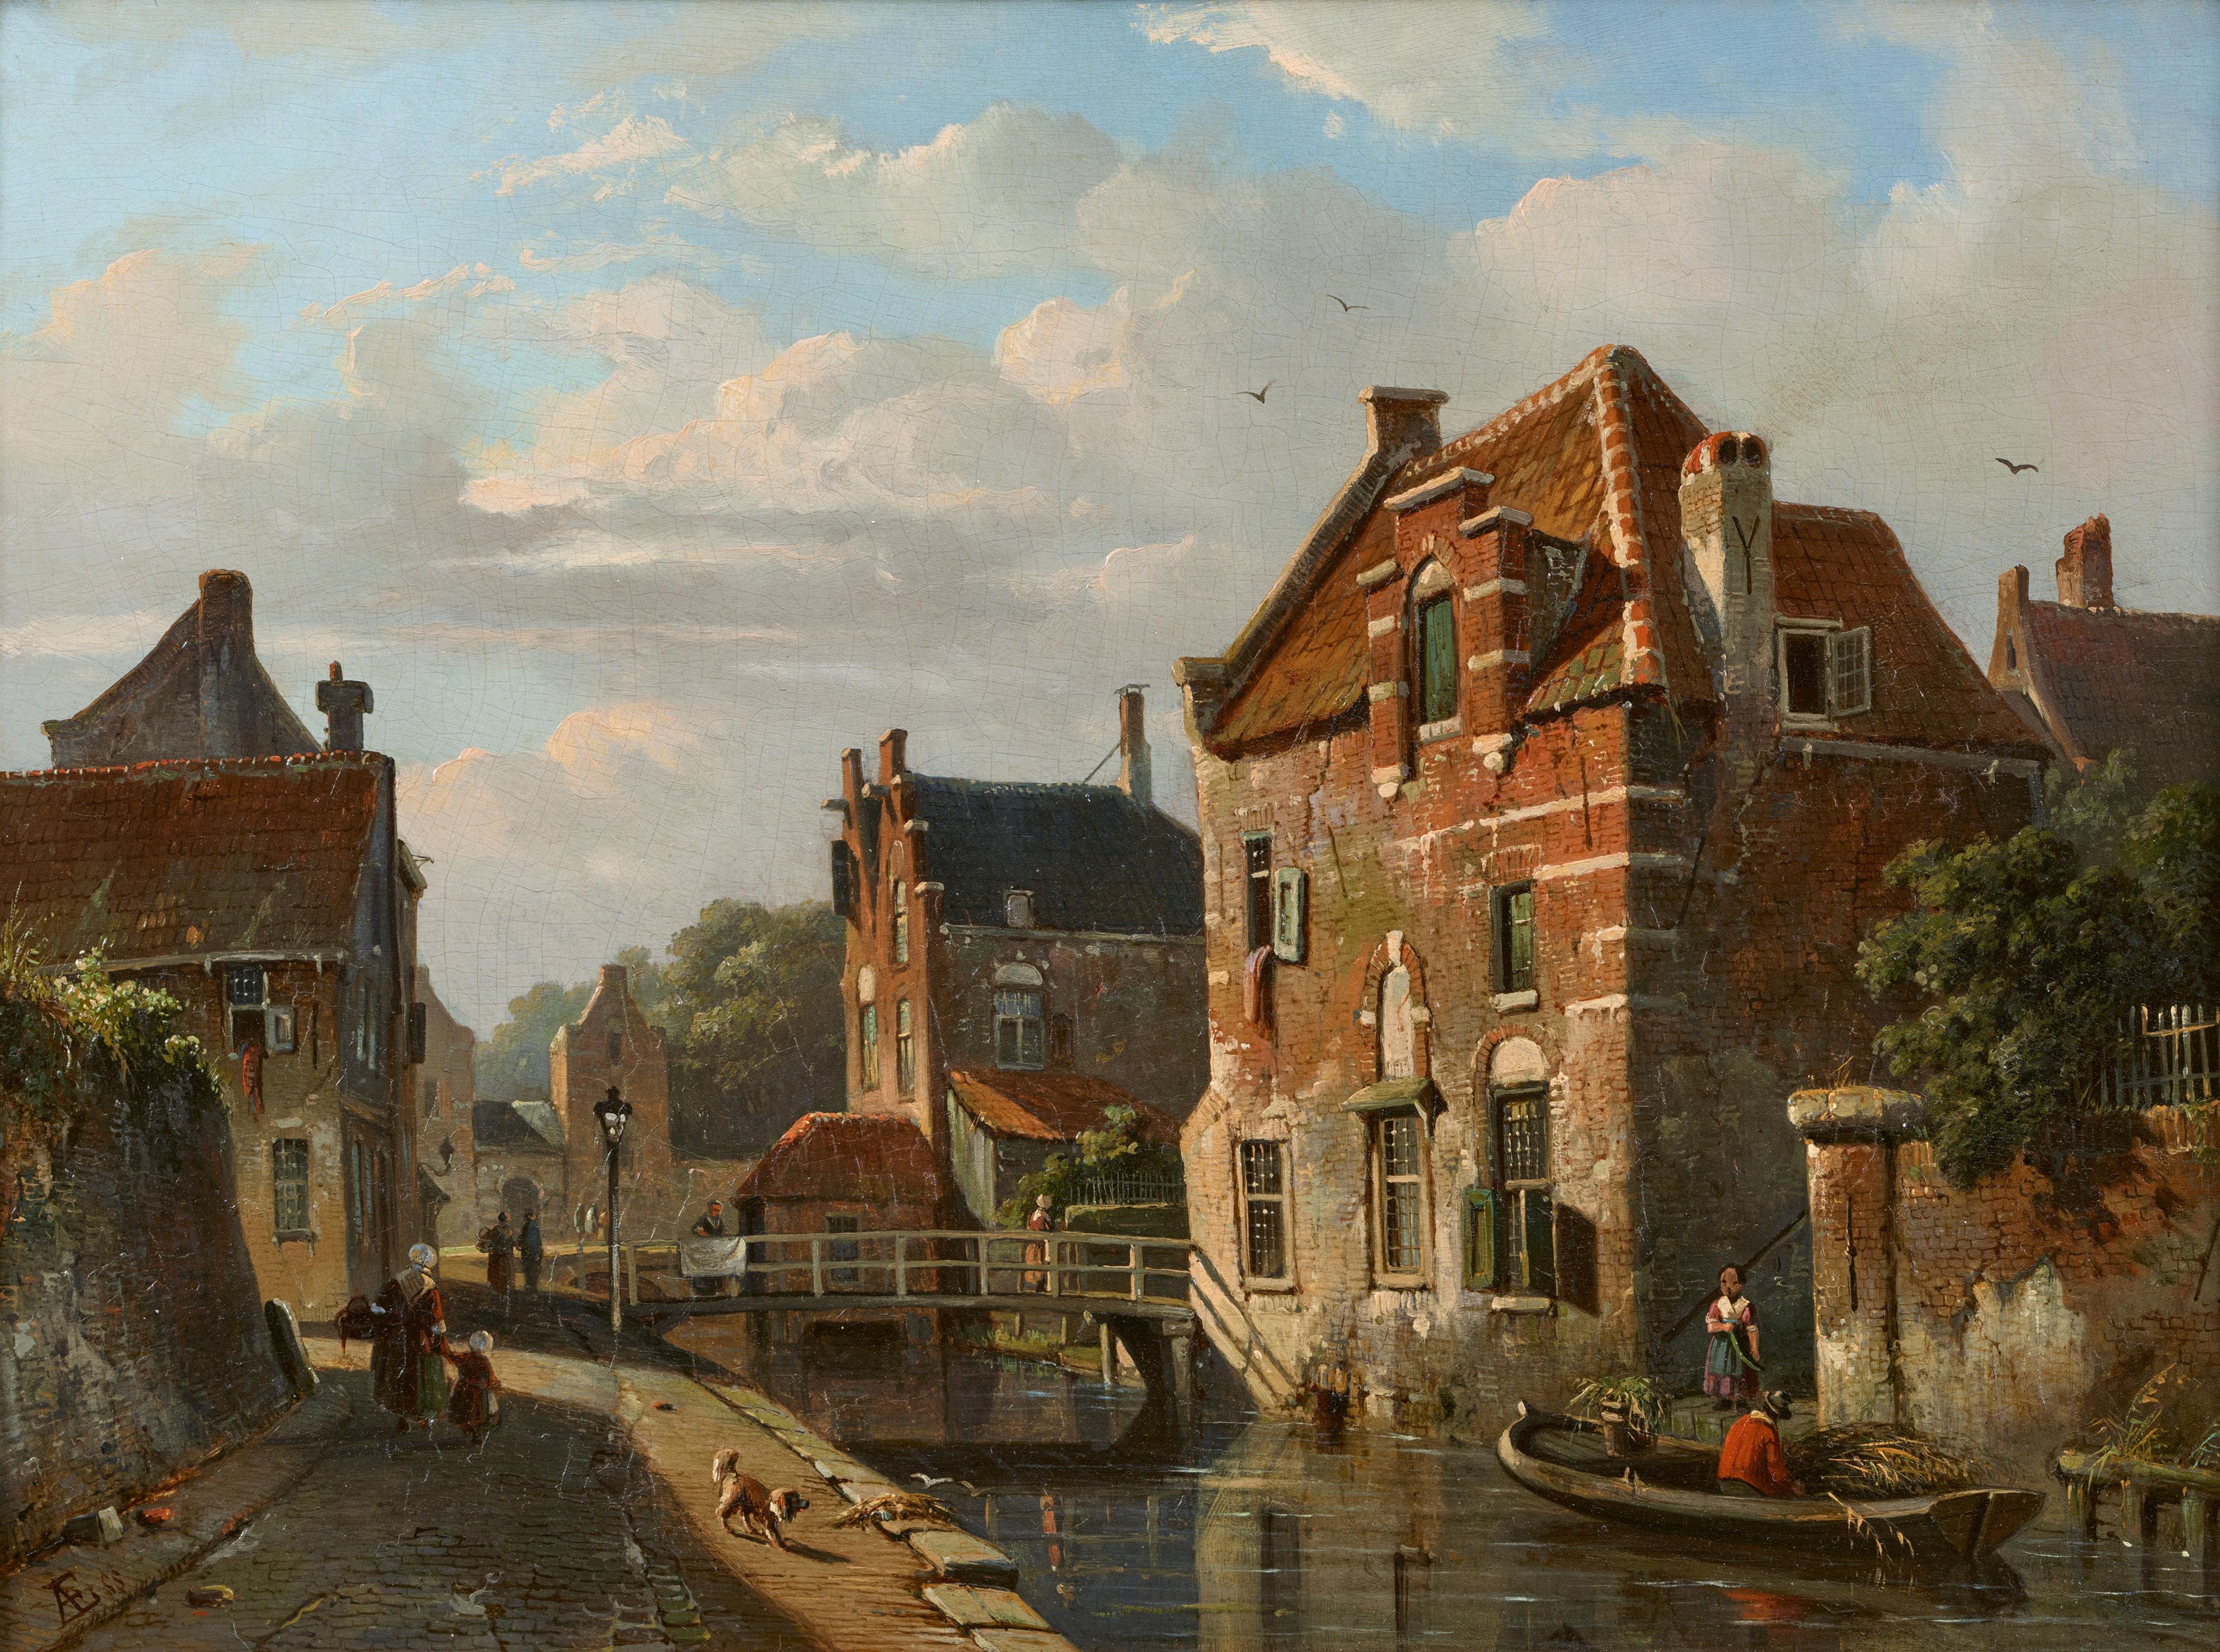 Adrianus Eversen - Pair of paintings: Summer View of a Town with a Haywain and Figures
Dutch Canal Scene with Figures and a Barge - image-2